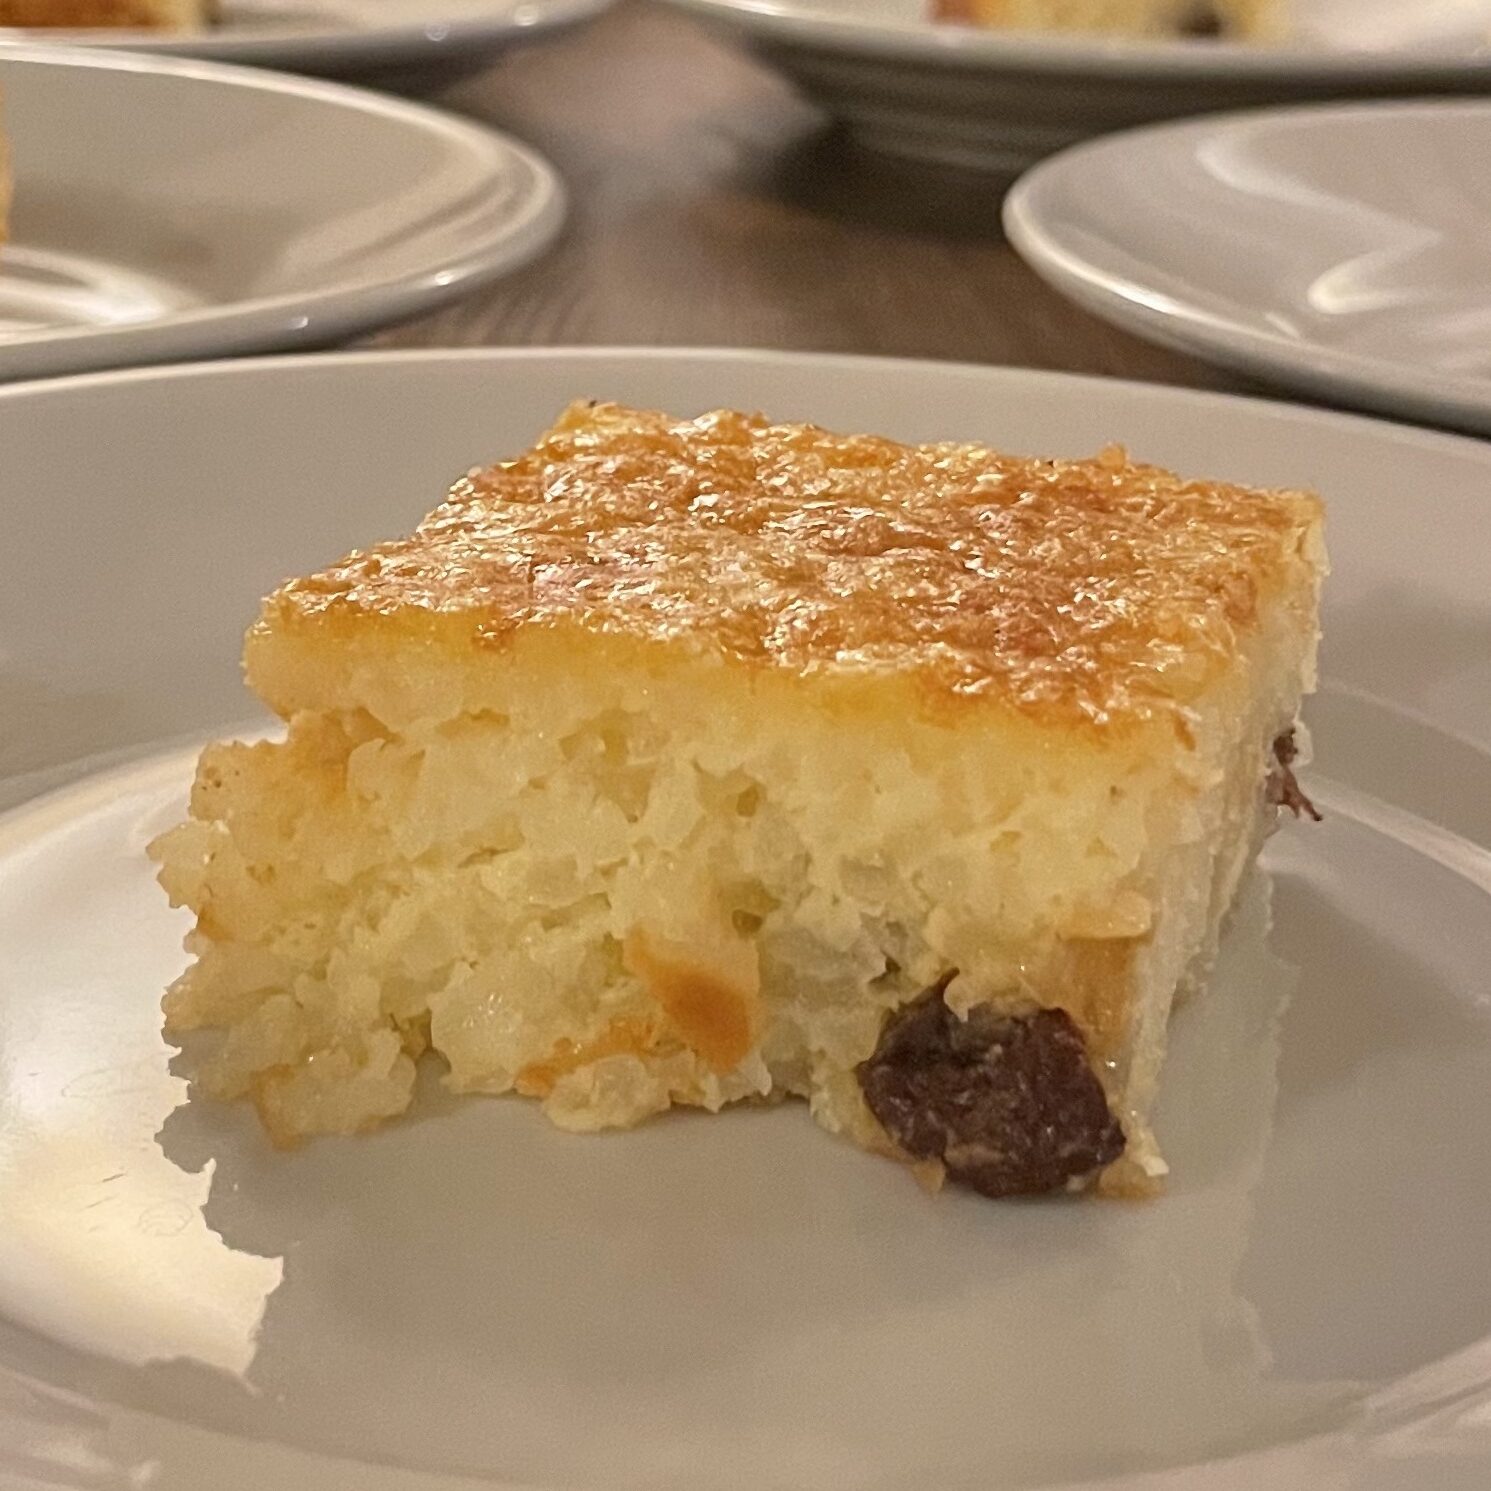 A square piece of the Dolce di Riso cake, with a gently browned top, grains of rice and speckled with raisins.